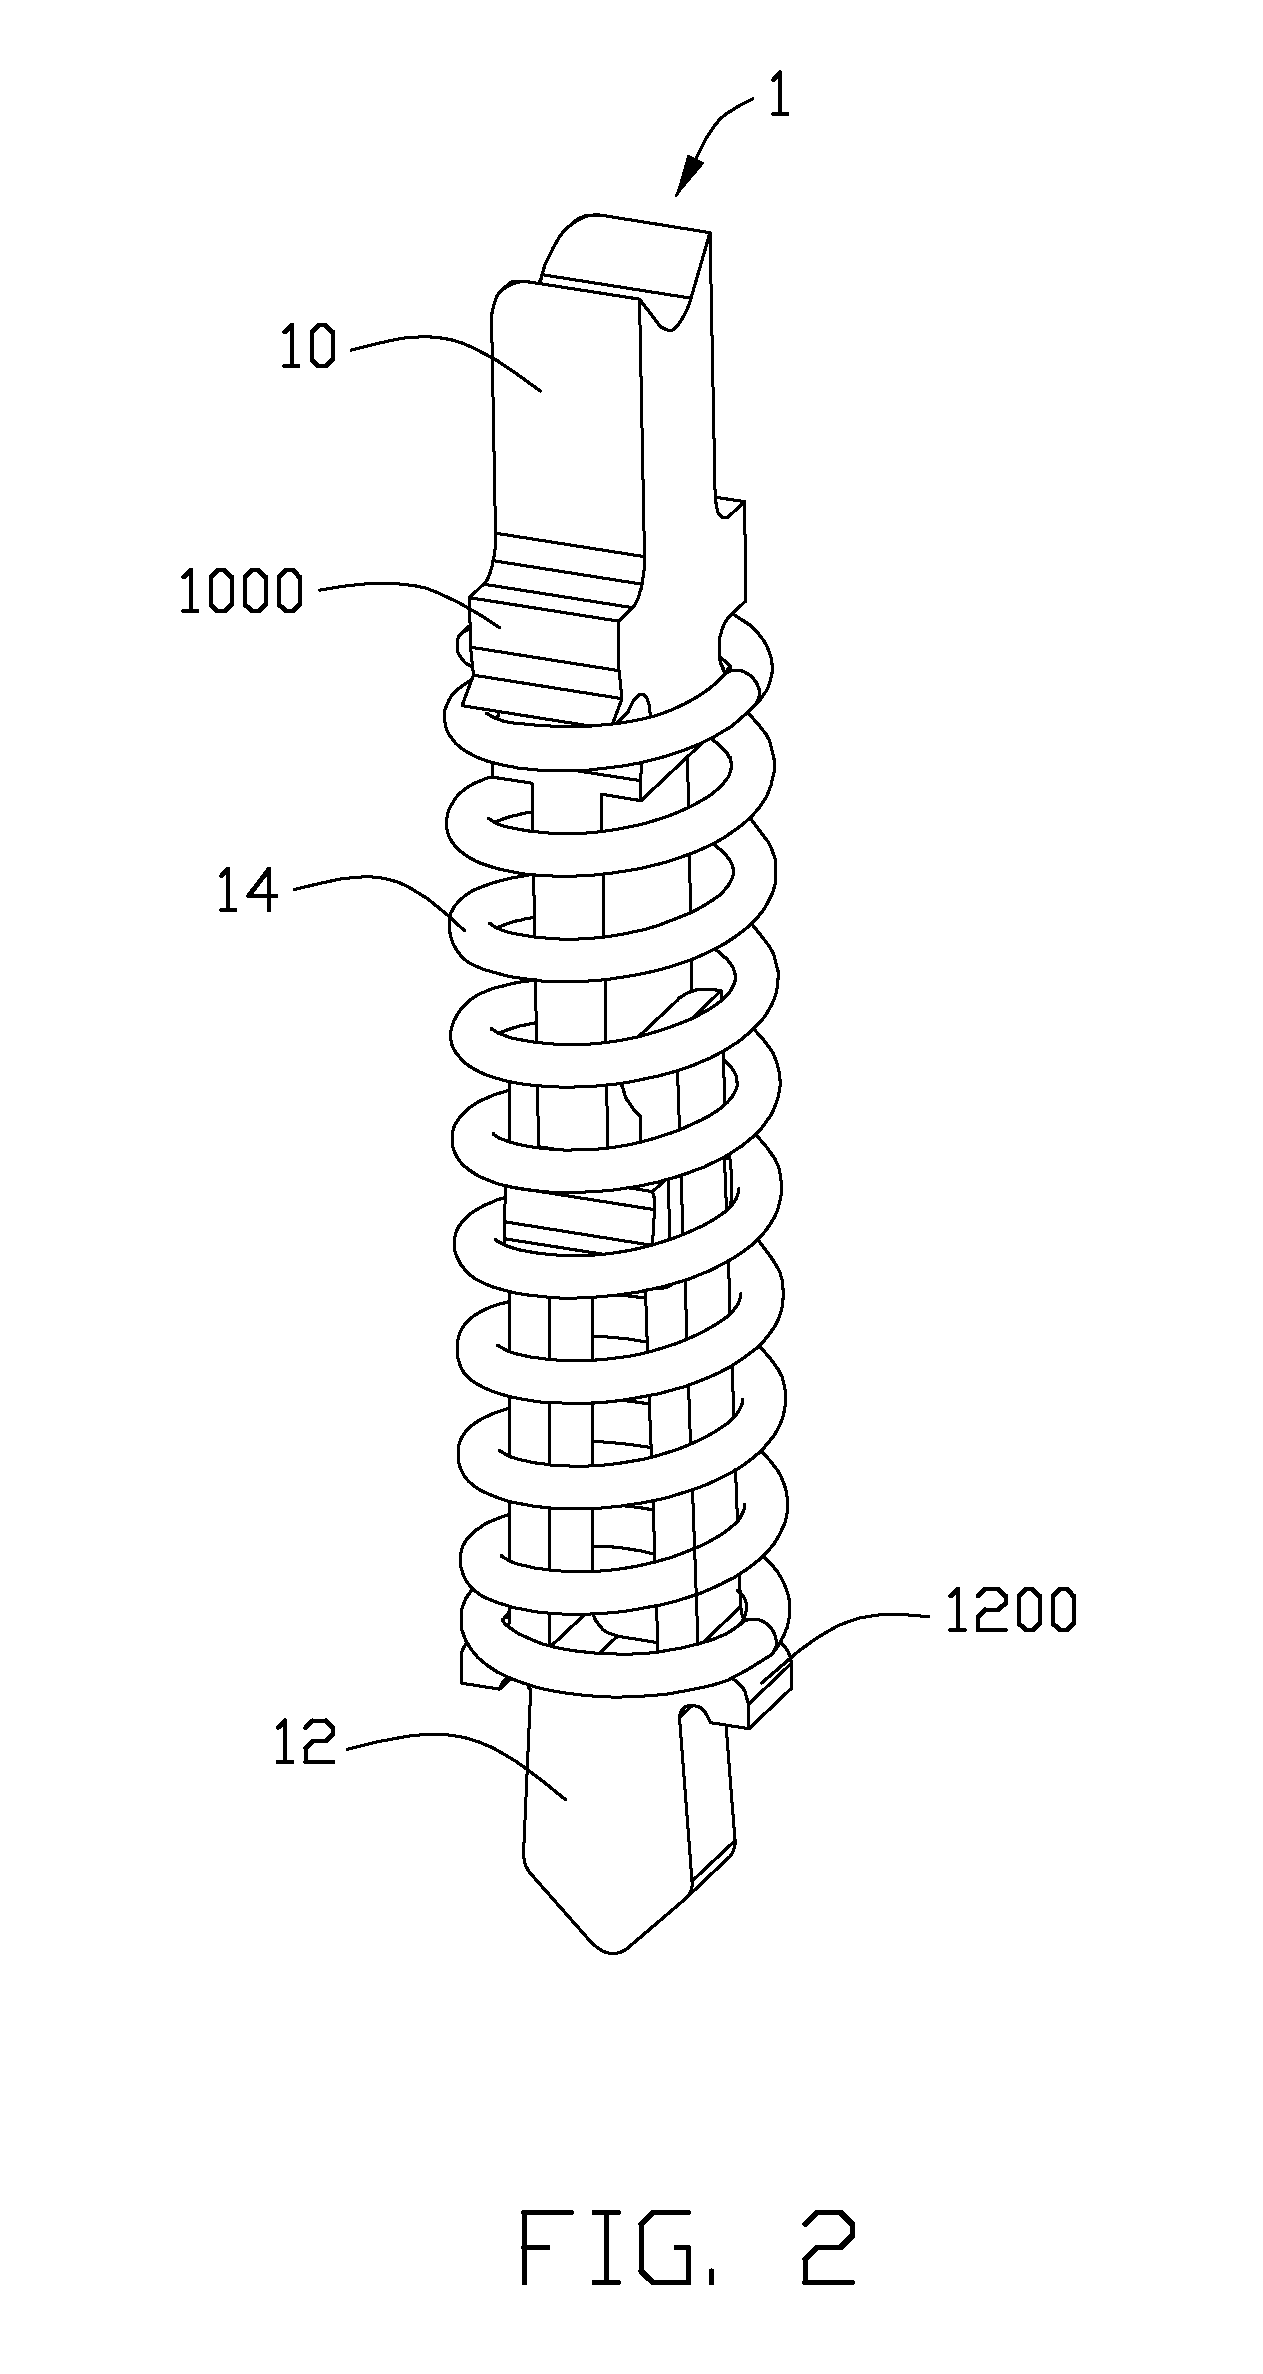 Composite contact assembly having lower contact with contact engaging points offset from each other